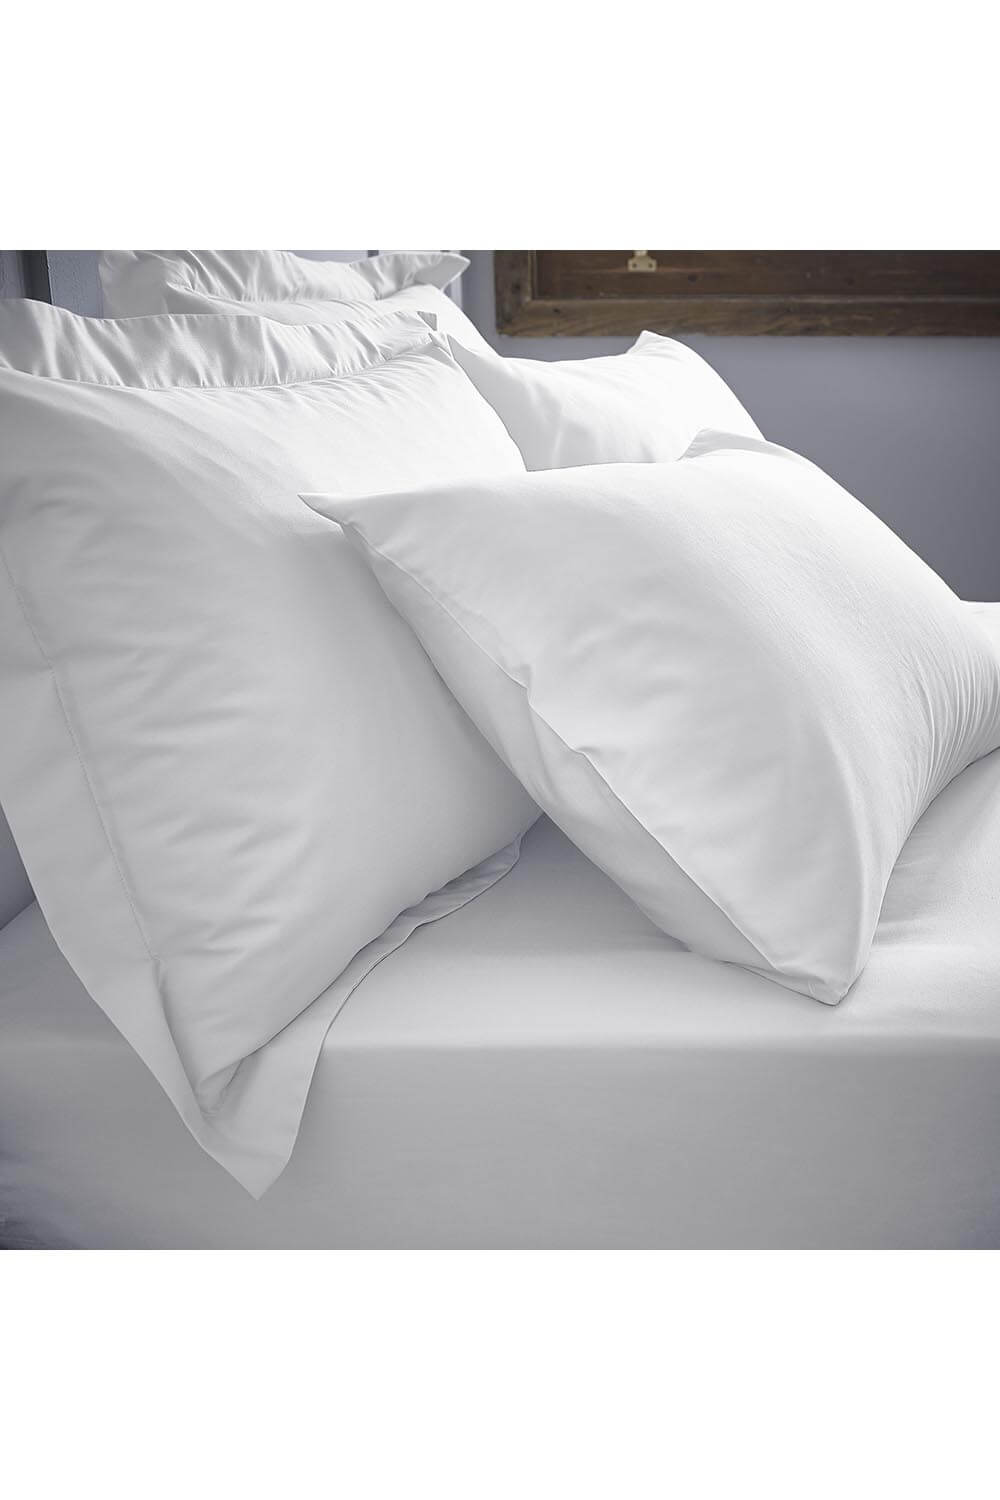 The Home Luxury Collection 200 Thread Count Deep Fitted Sheet - White 1 Shaws Department Stores